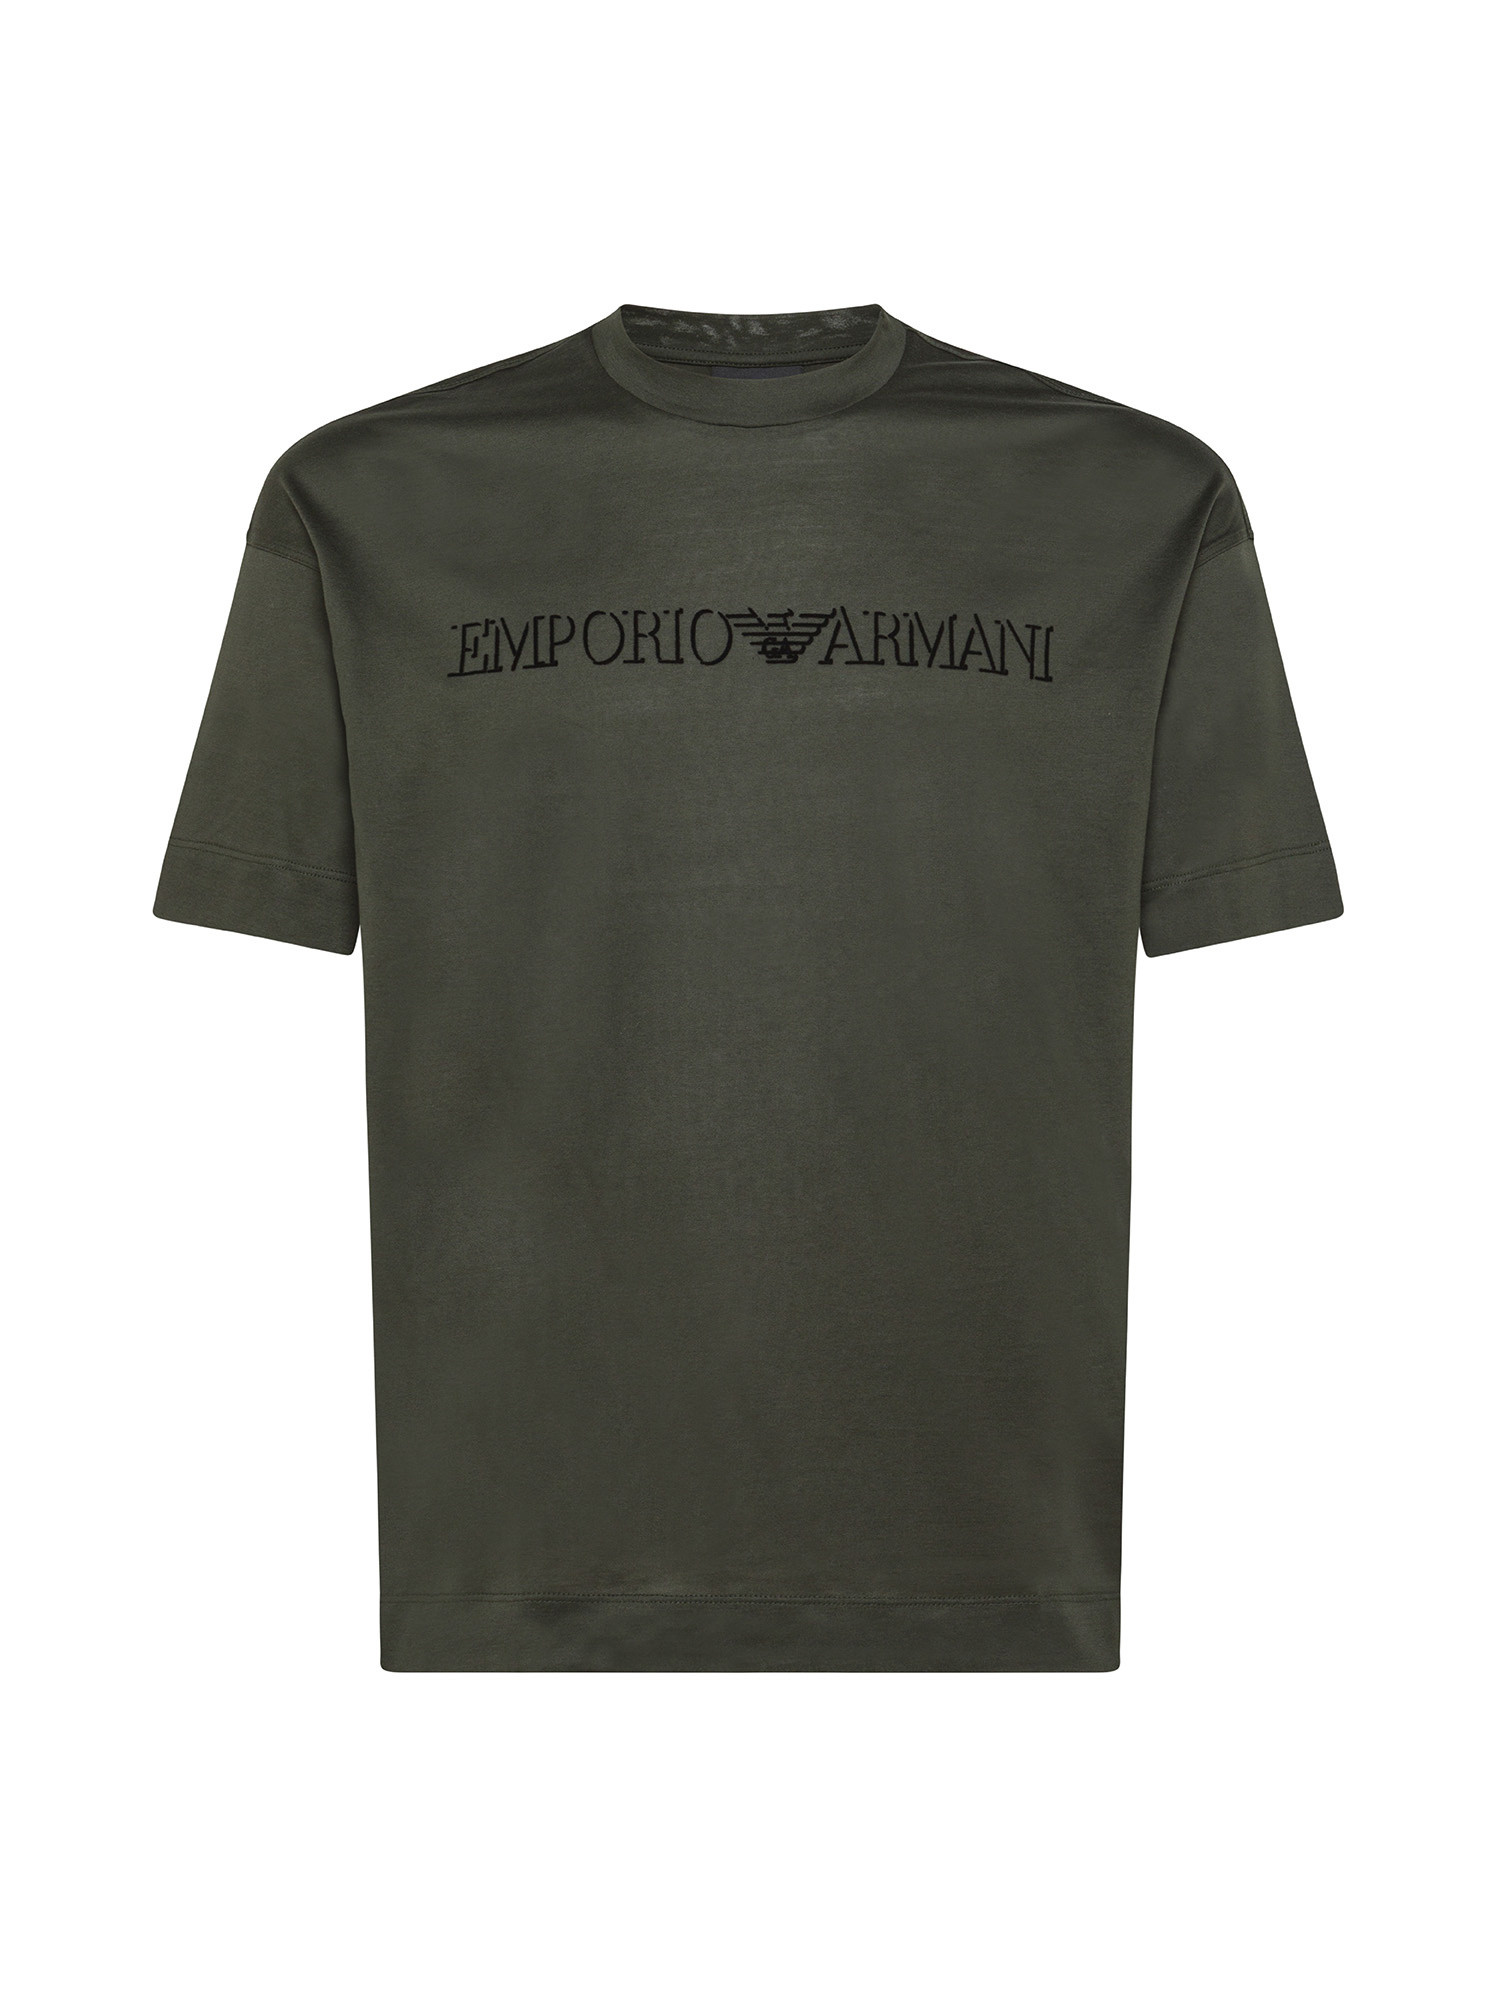 Emporio Armani - T-shirt in jersey mercerizzato con logo flock, Verde, large image number 0